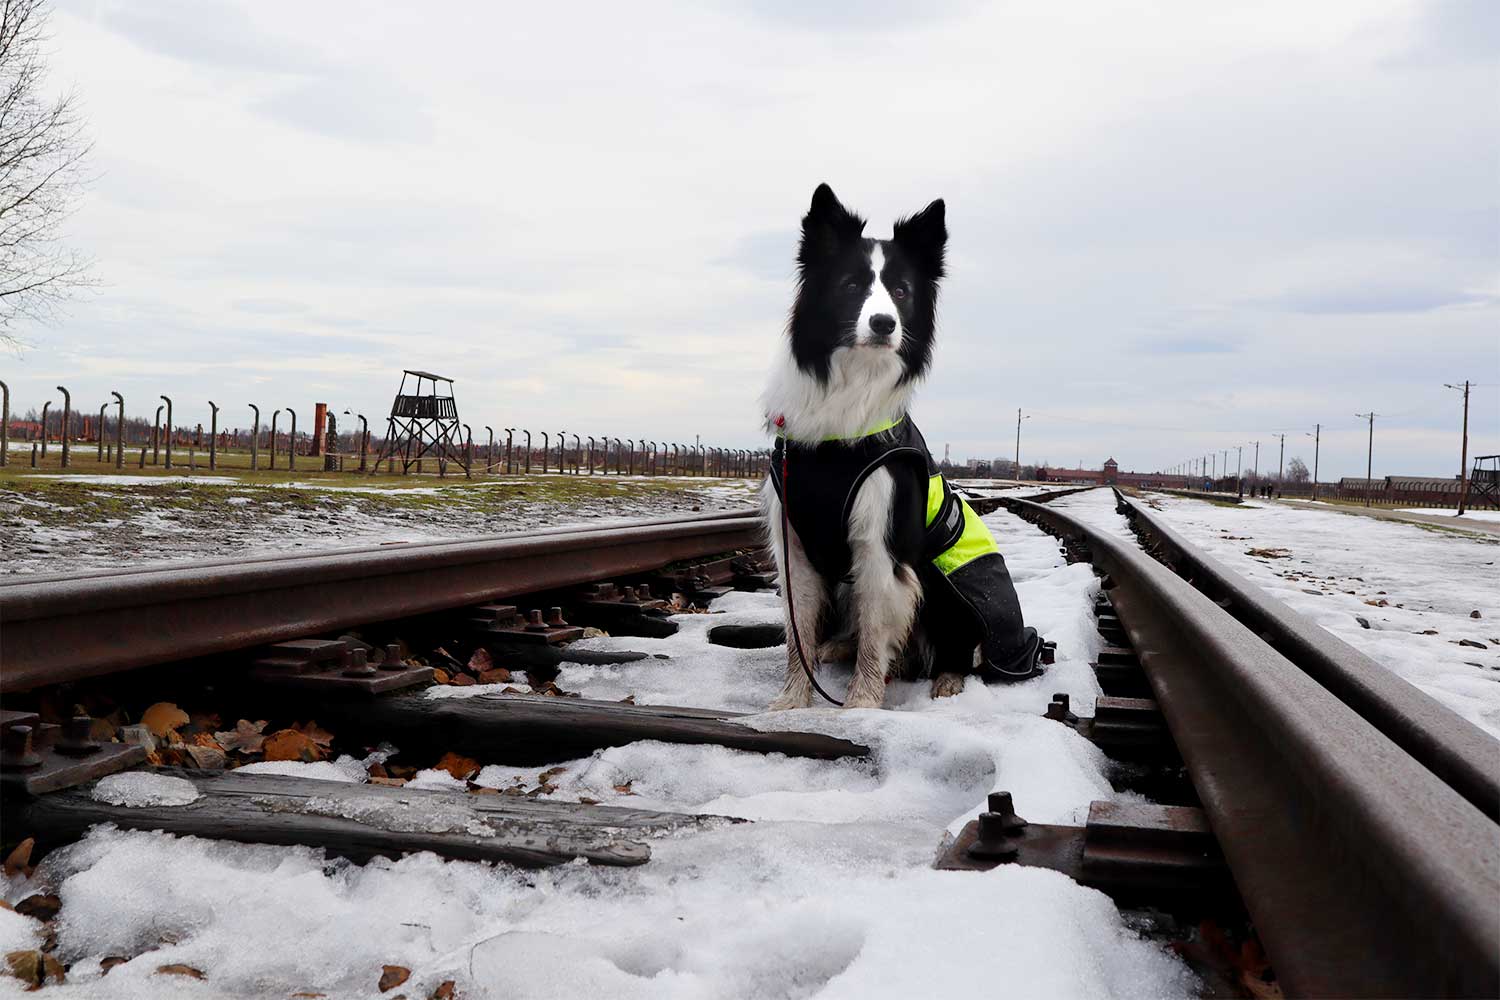 Rafa on the snow of the railway line at Auschwitz concentration camp.